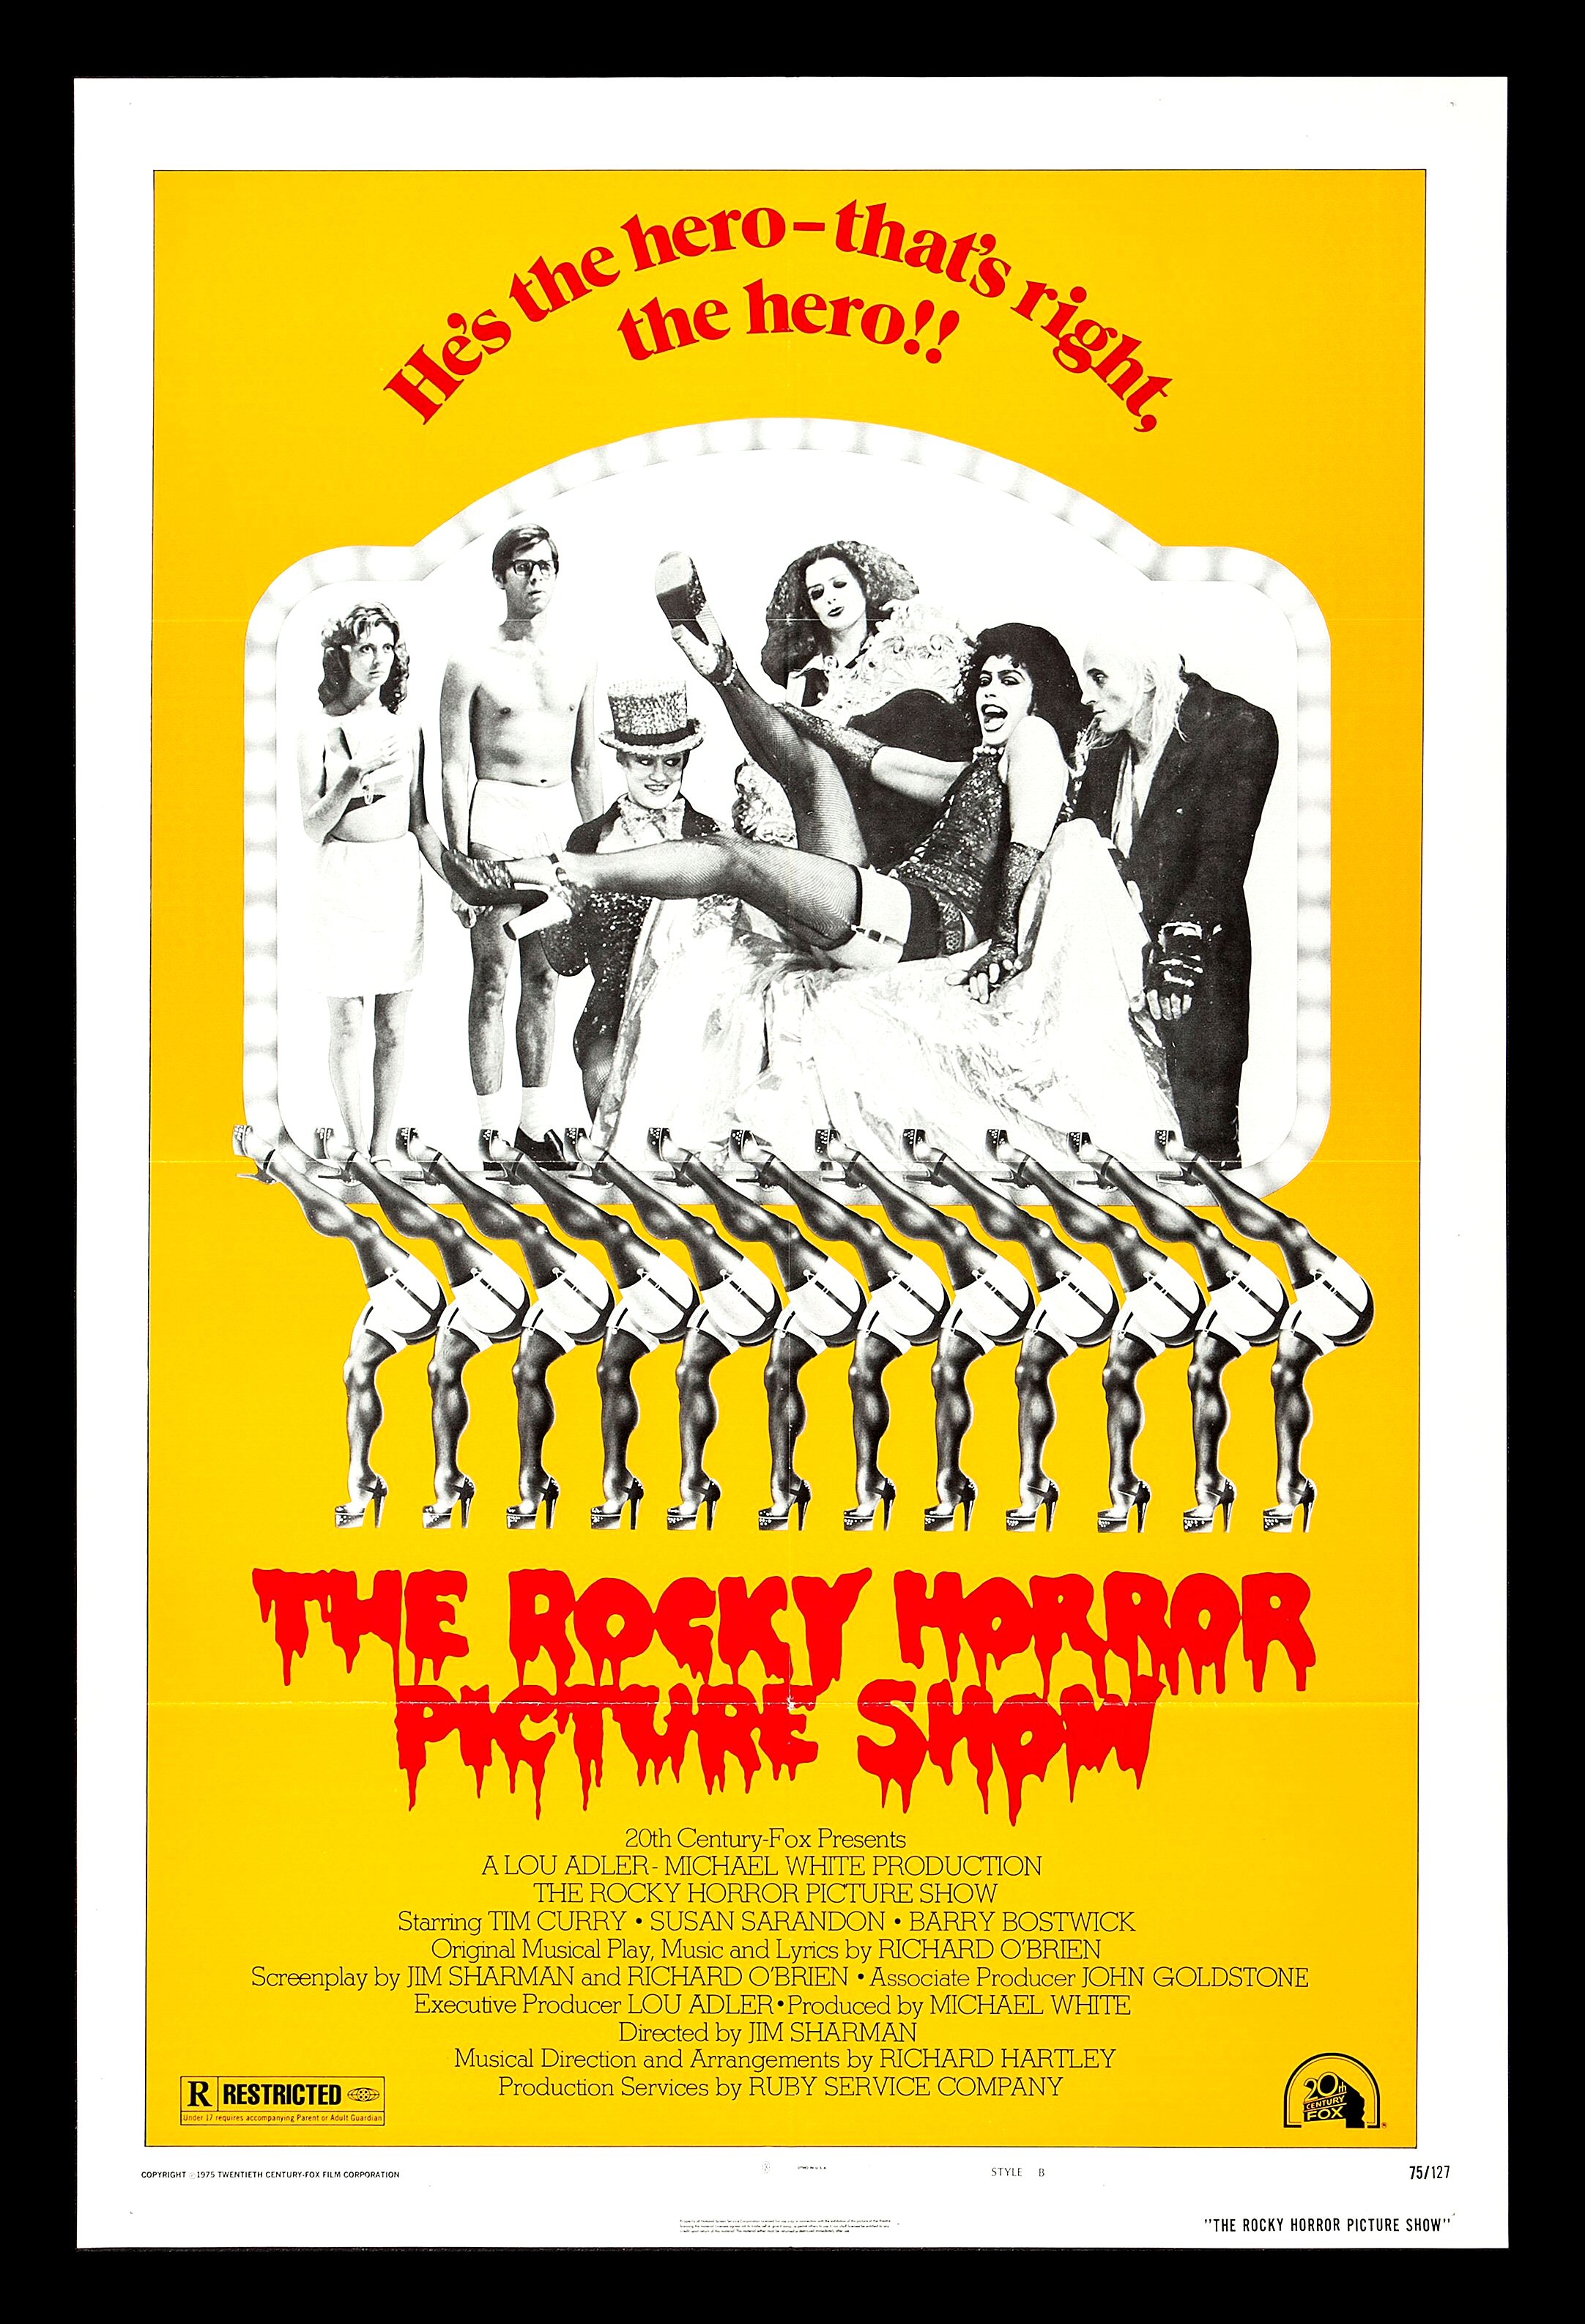 The rocky horror show poster.